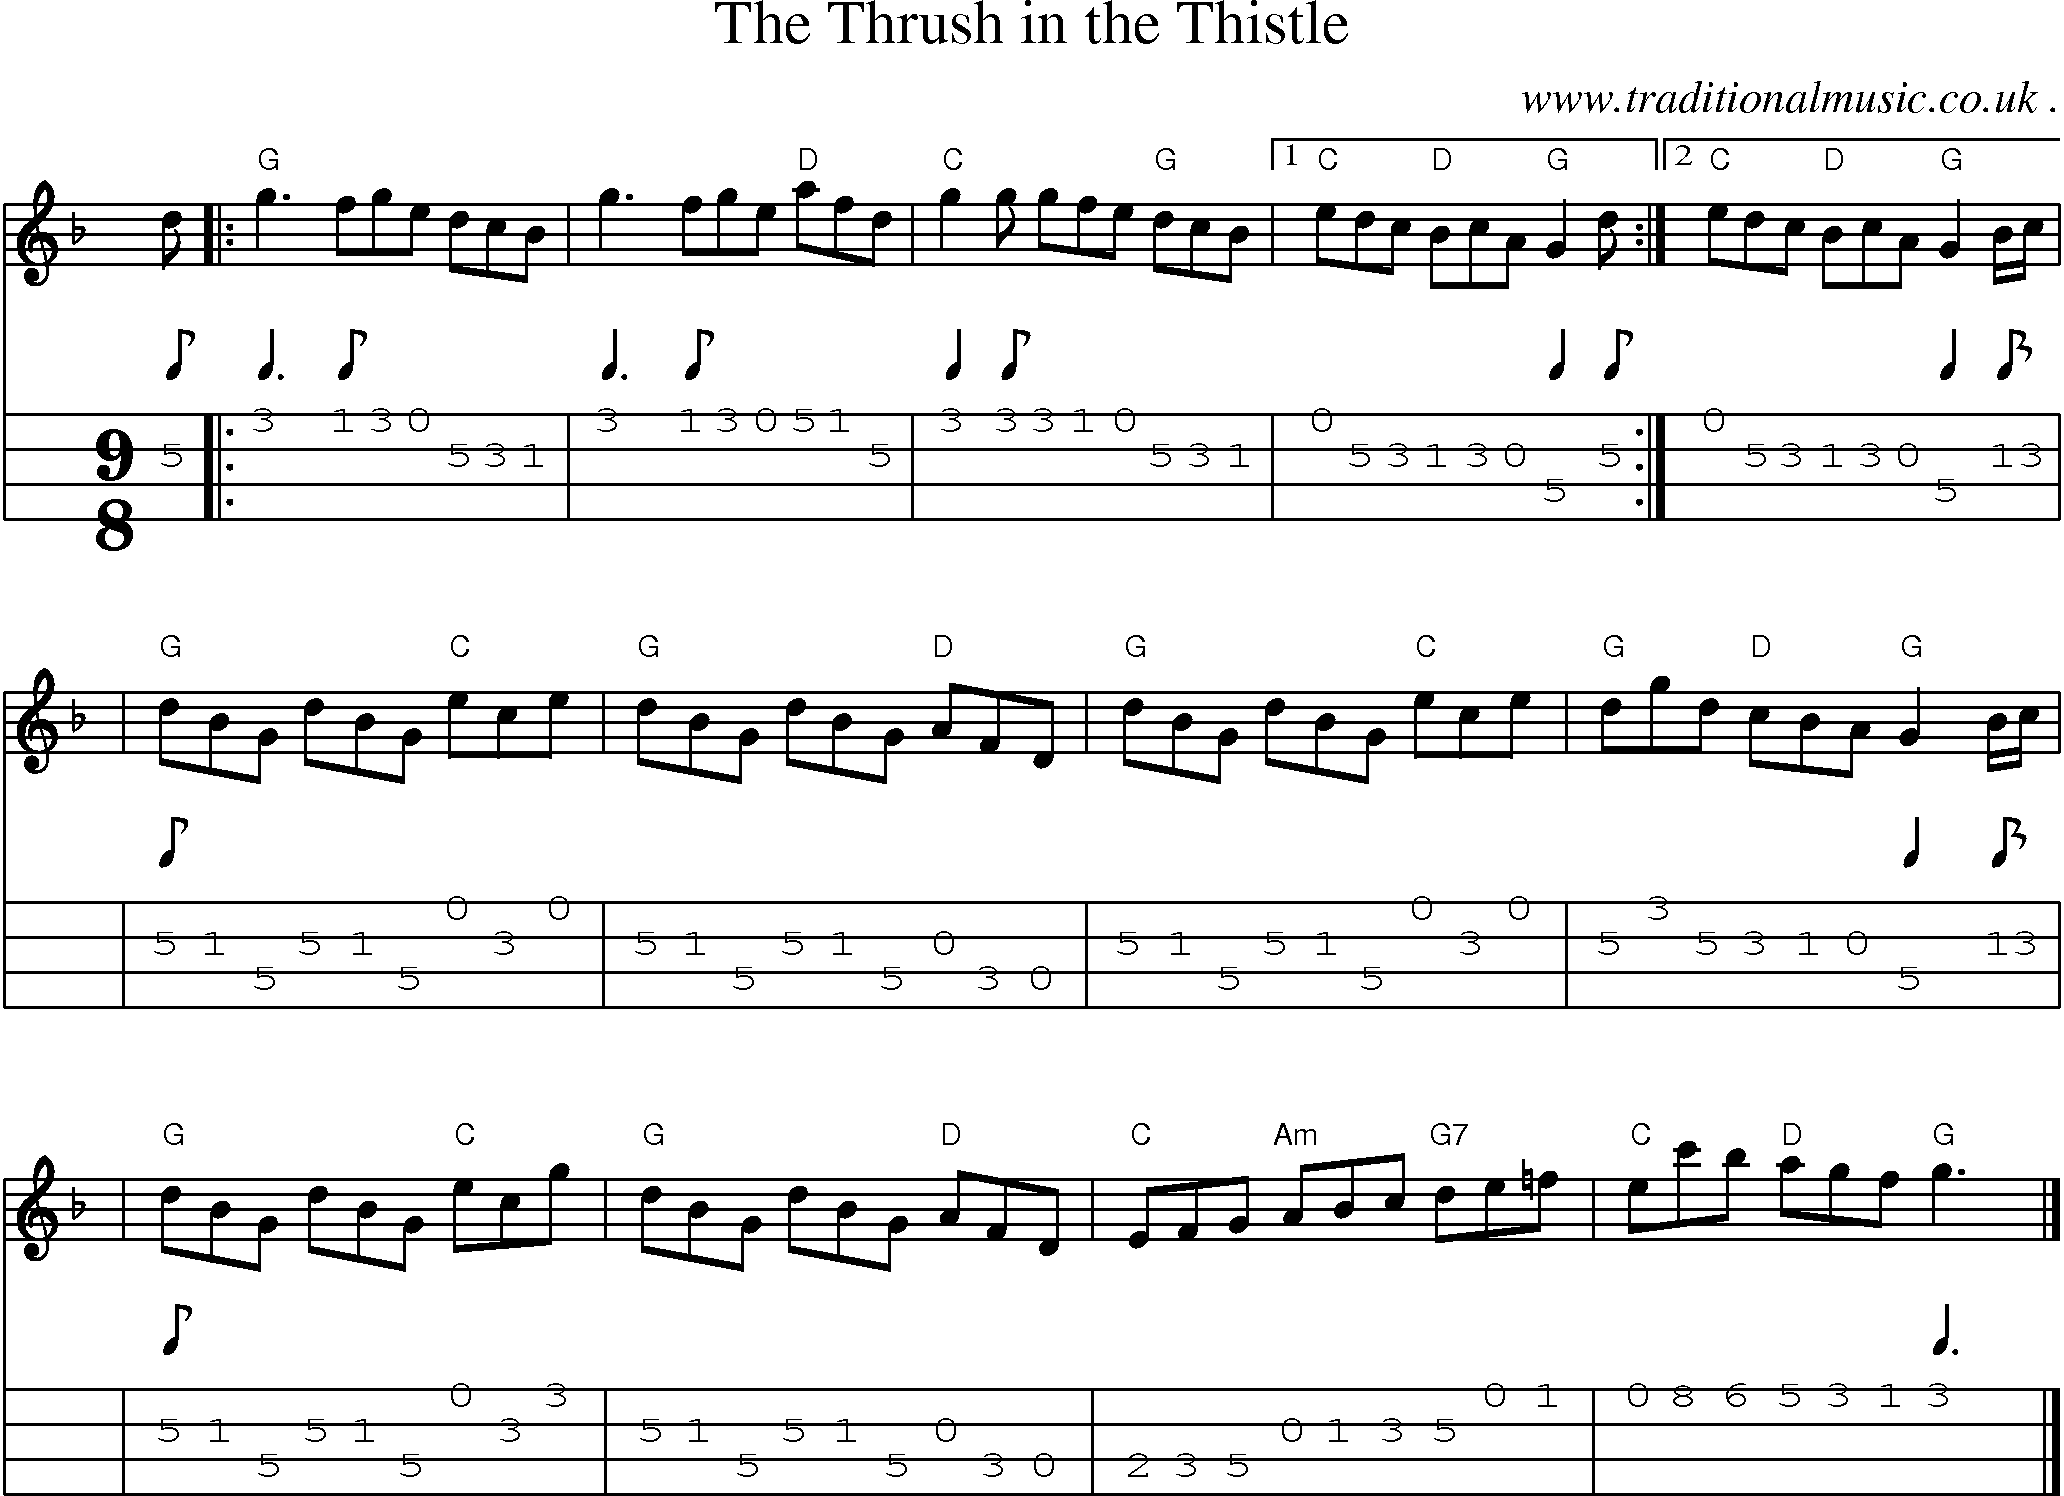 Sheet-music  score, Chords and Mandolin Tabs for The Thrush In The Thistle